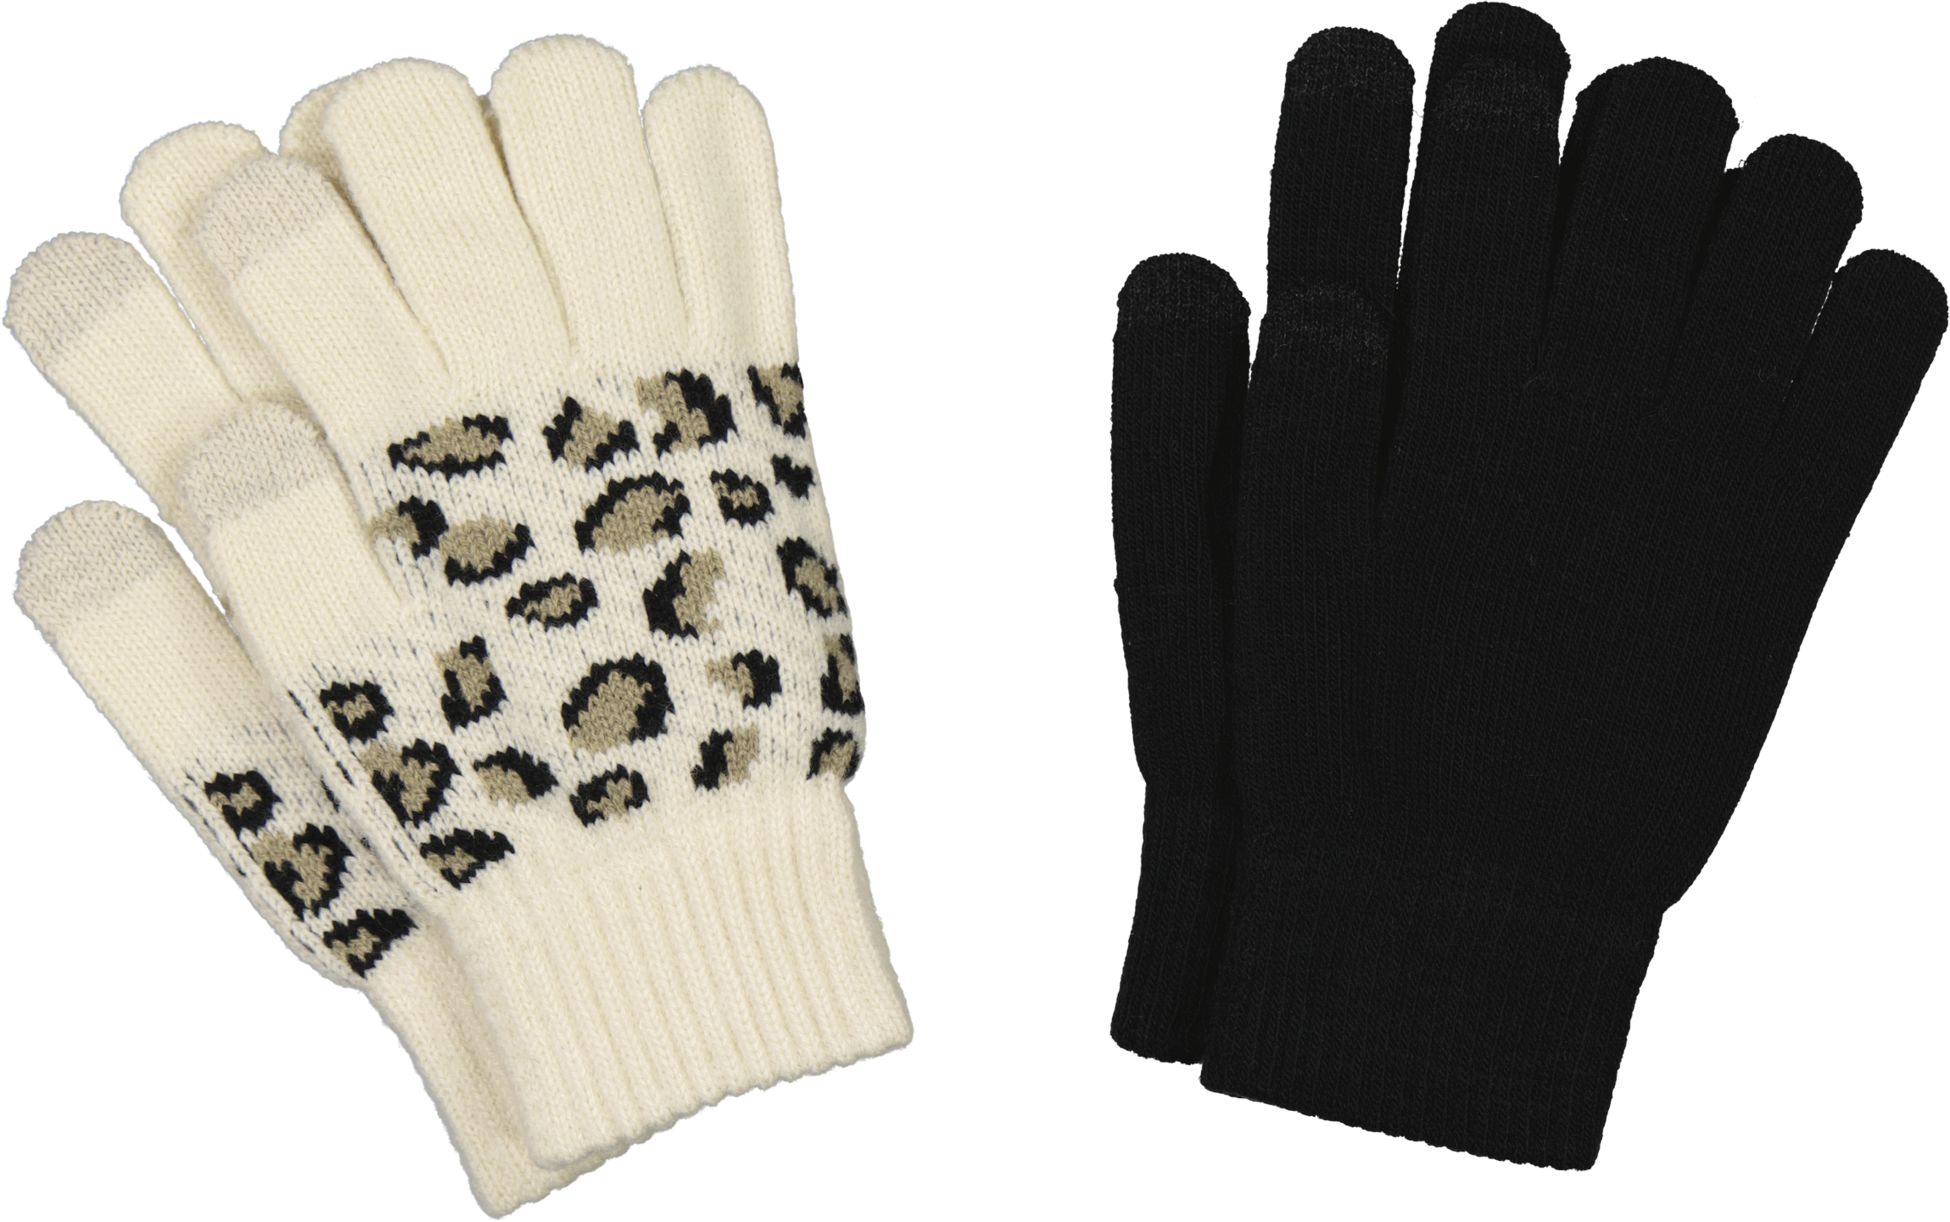 EVEREST, J 2-PACK TOUCH GLOVE